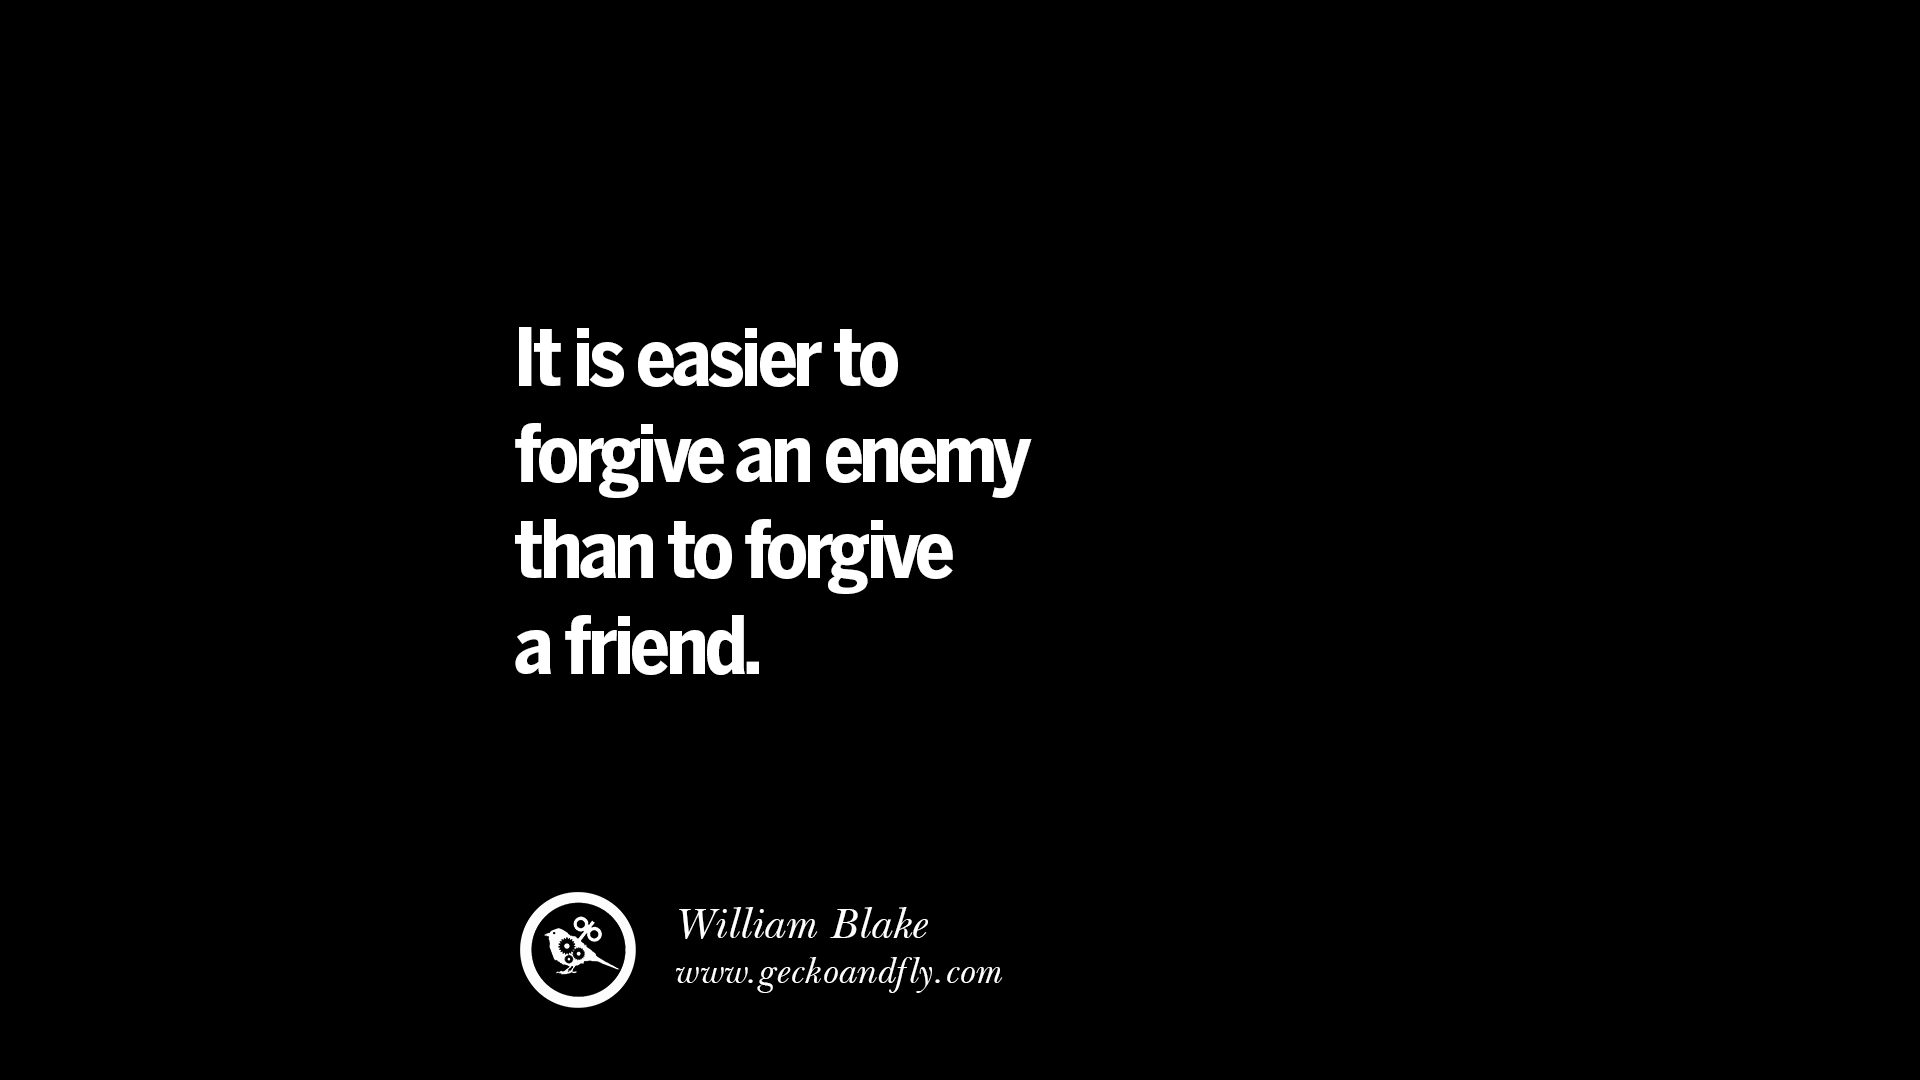 Quotes on Friendship, Trust and Love Betrayal It is easier to forgive